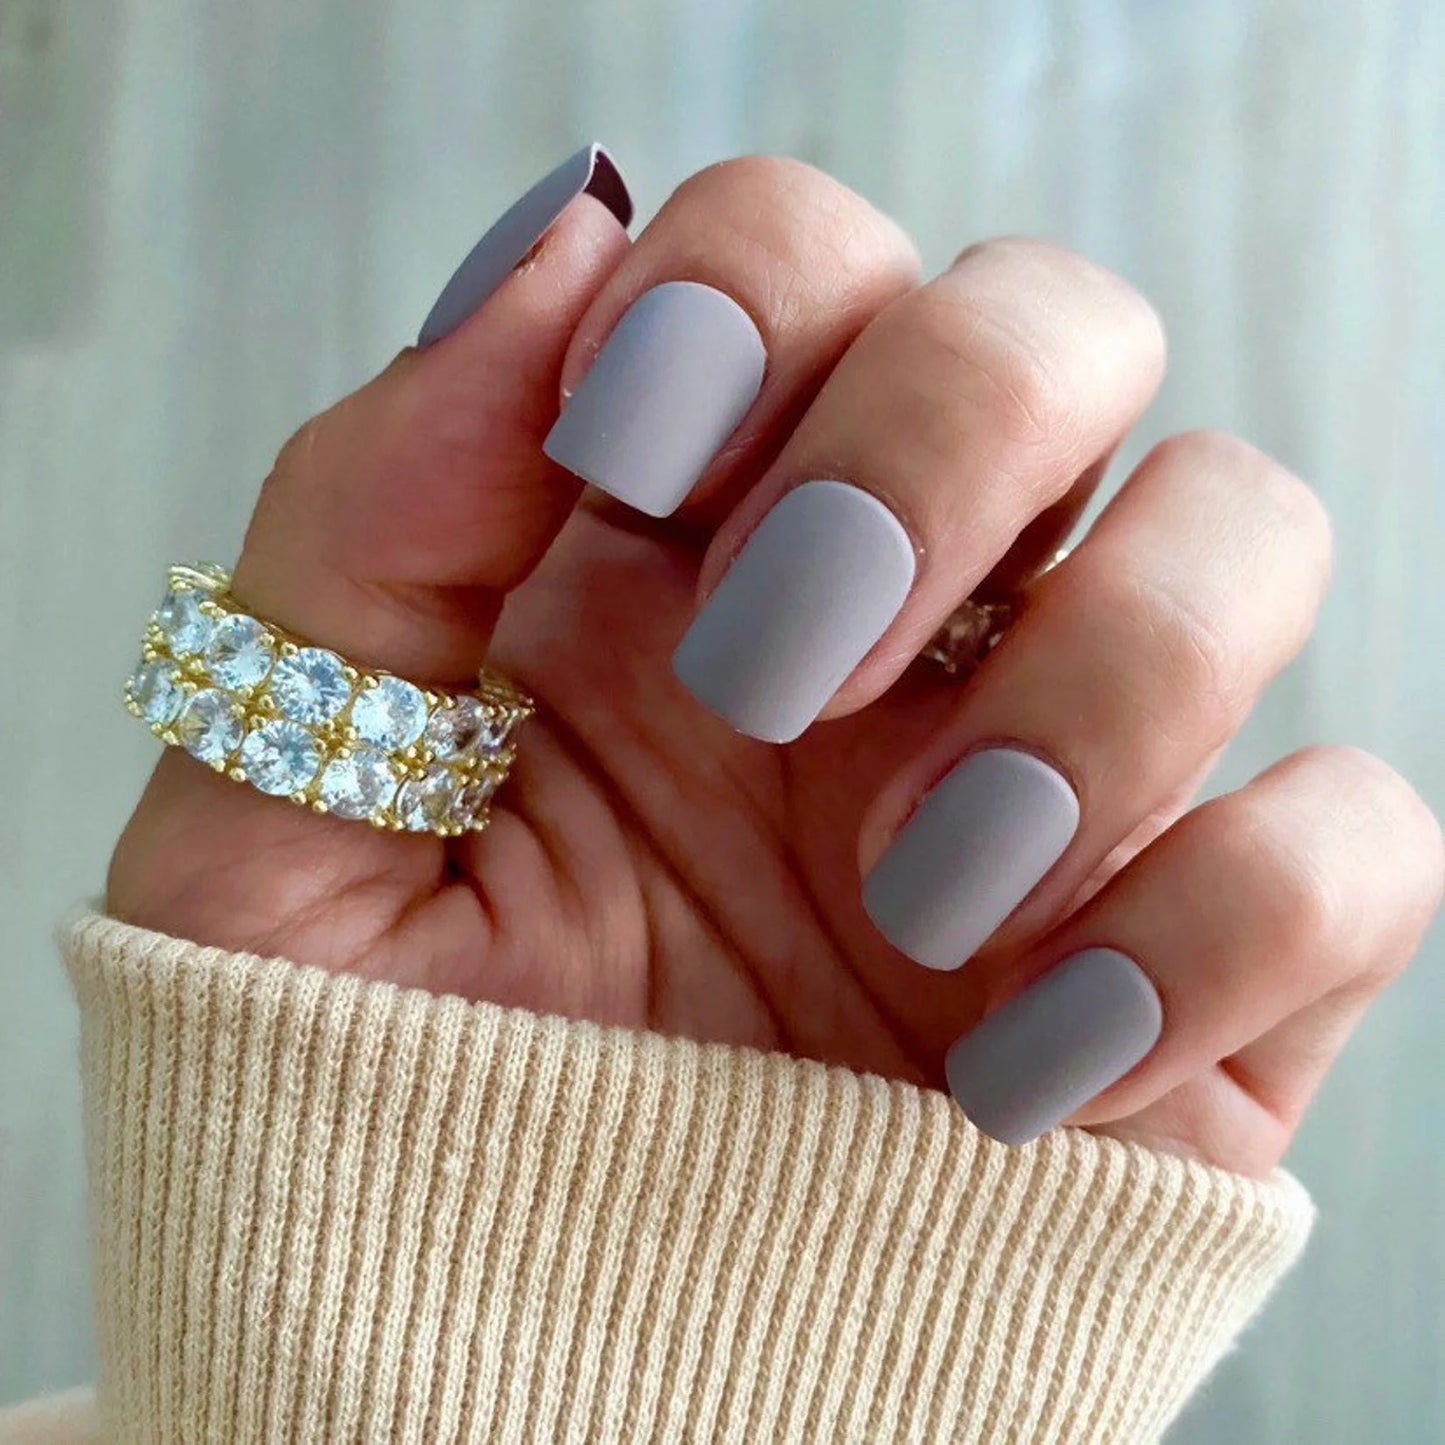 24 Matte Grey Short Press on nails kit glue on gray muted